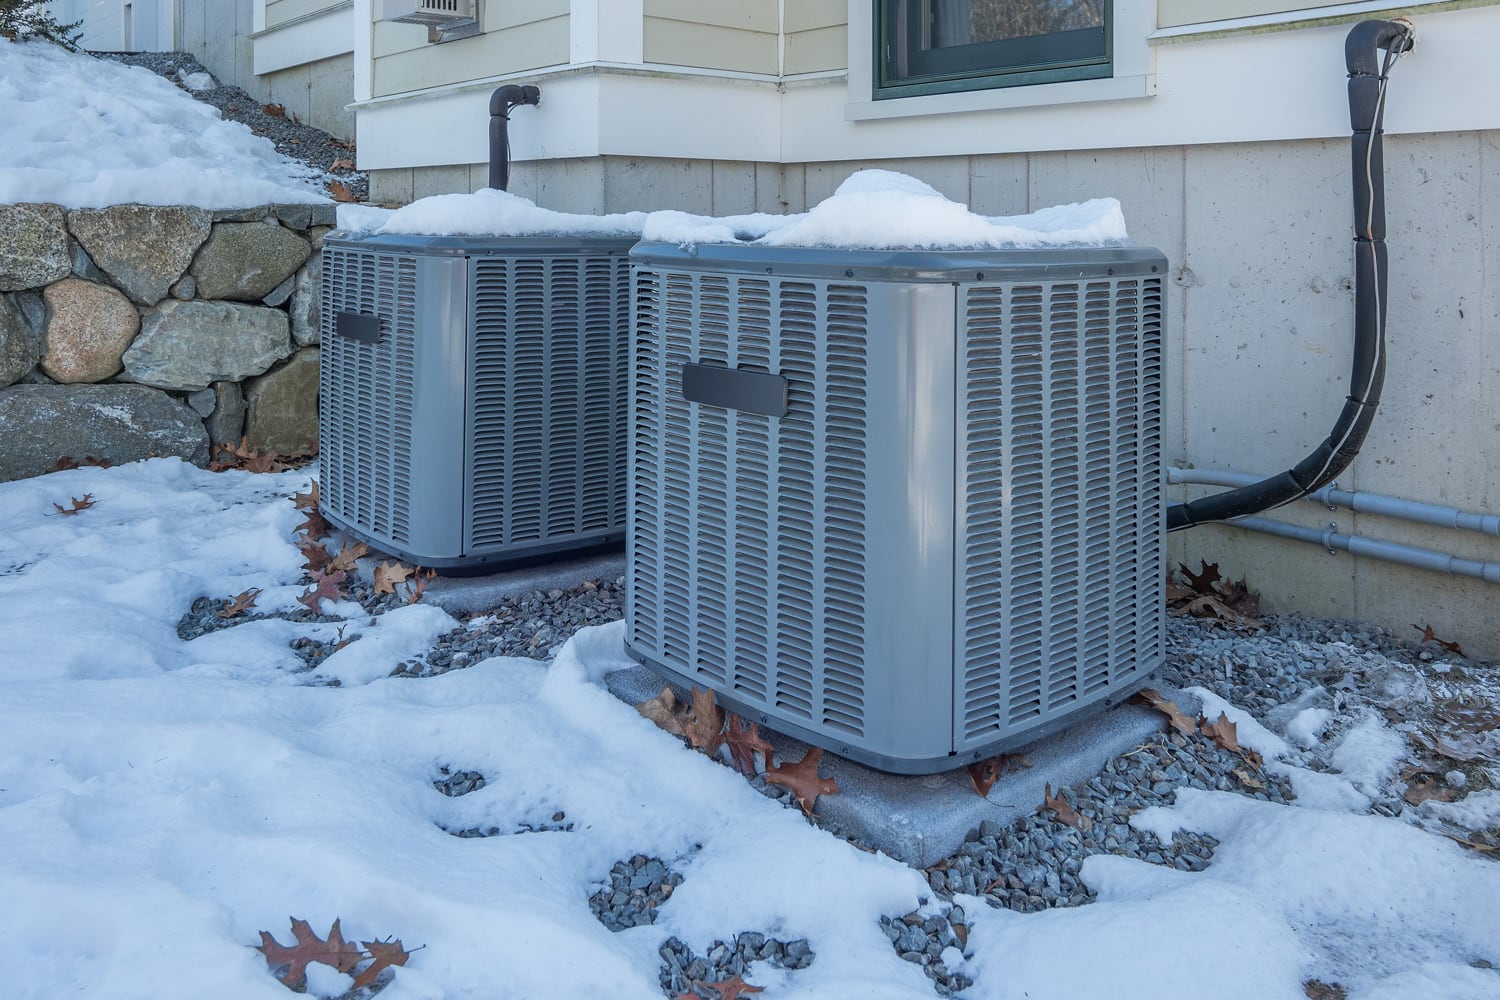 Heating and air conditioning units used to heat and cool a house